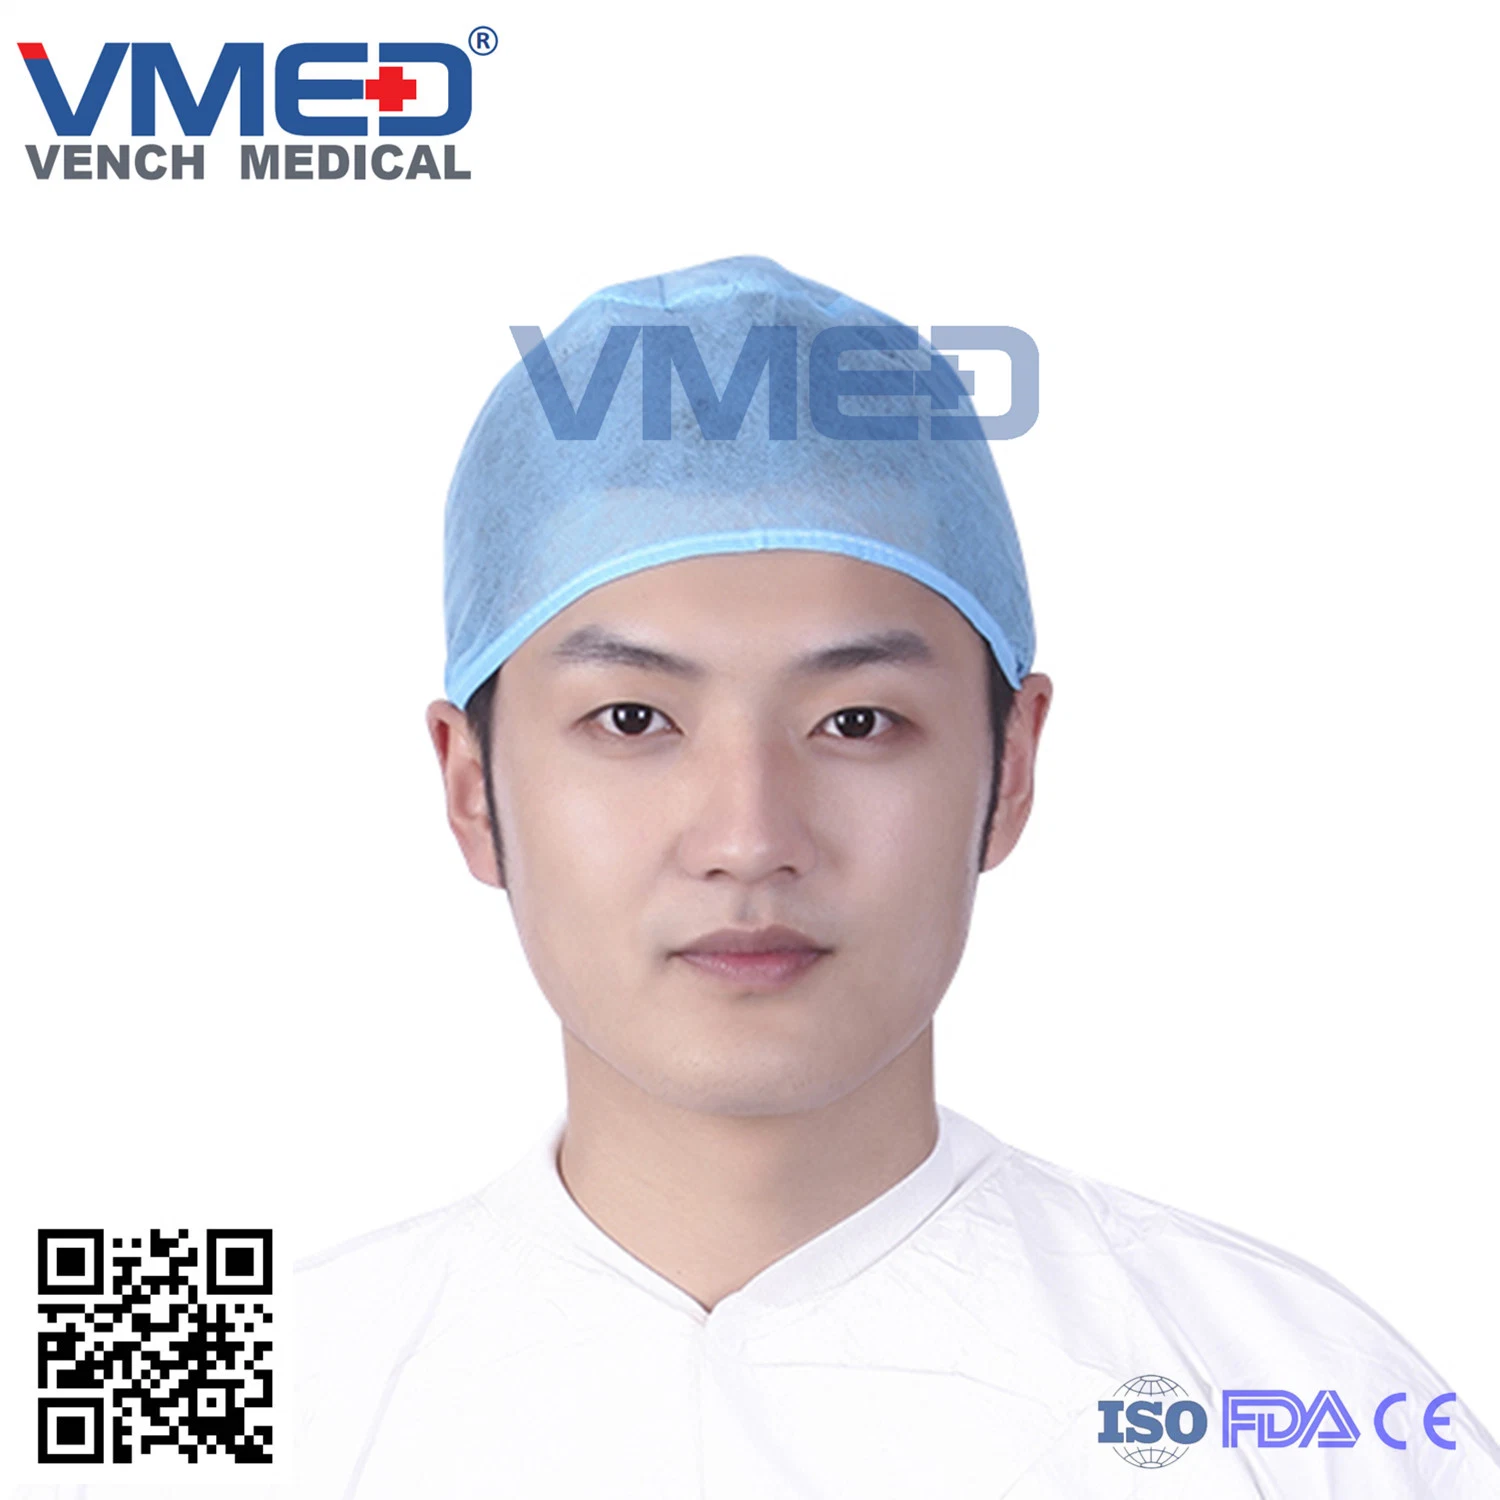 Nonwoven Surgical Cap with Easy Tie/ Elastic Band/ Doctor/Medical/ Bouffant/ Clip/ Mob Cap